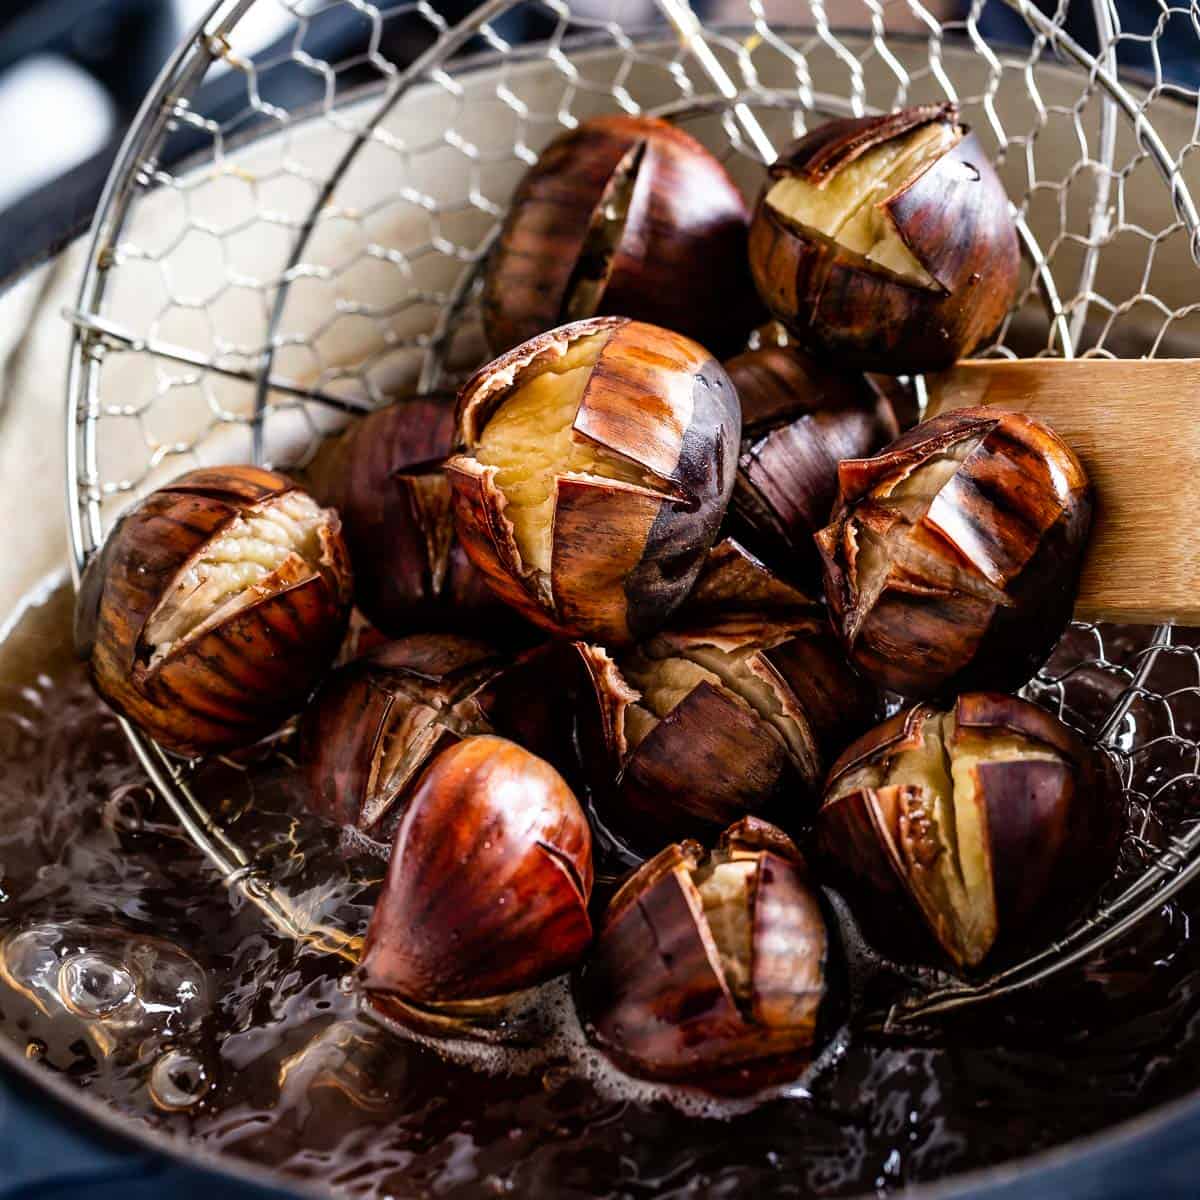 Boiled Chestnuts - How To Boil and Peel Chestnuts - Foolproof Living